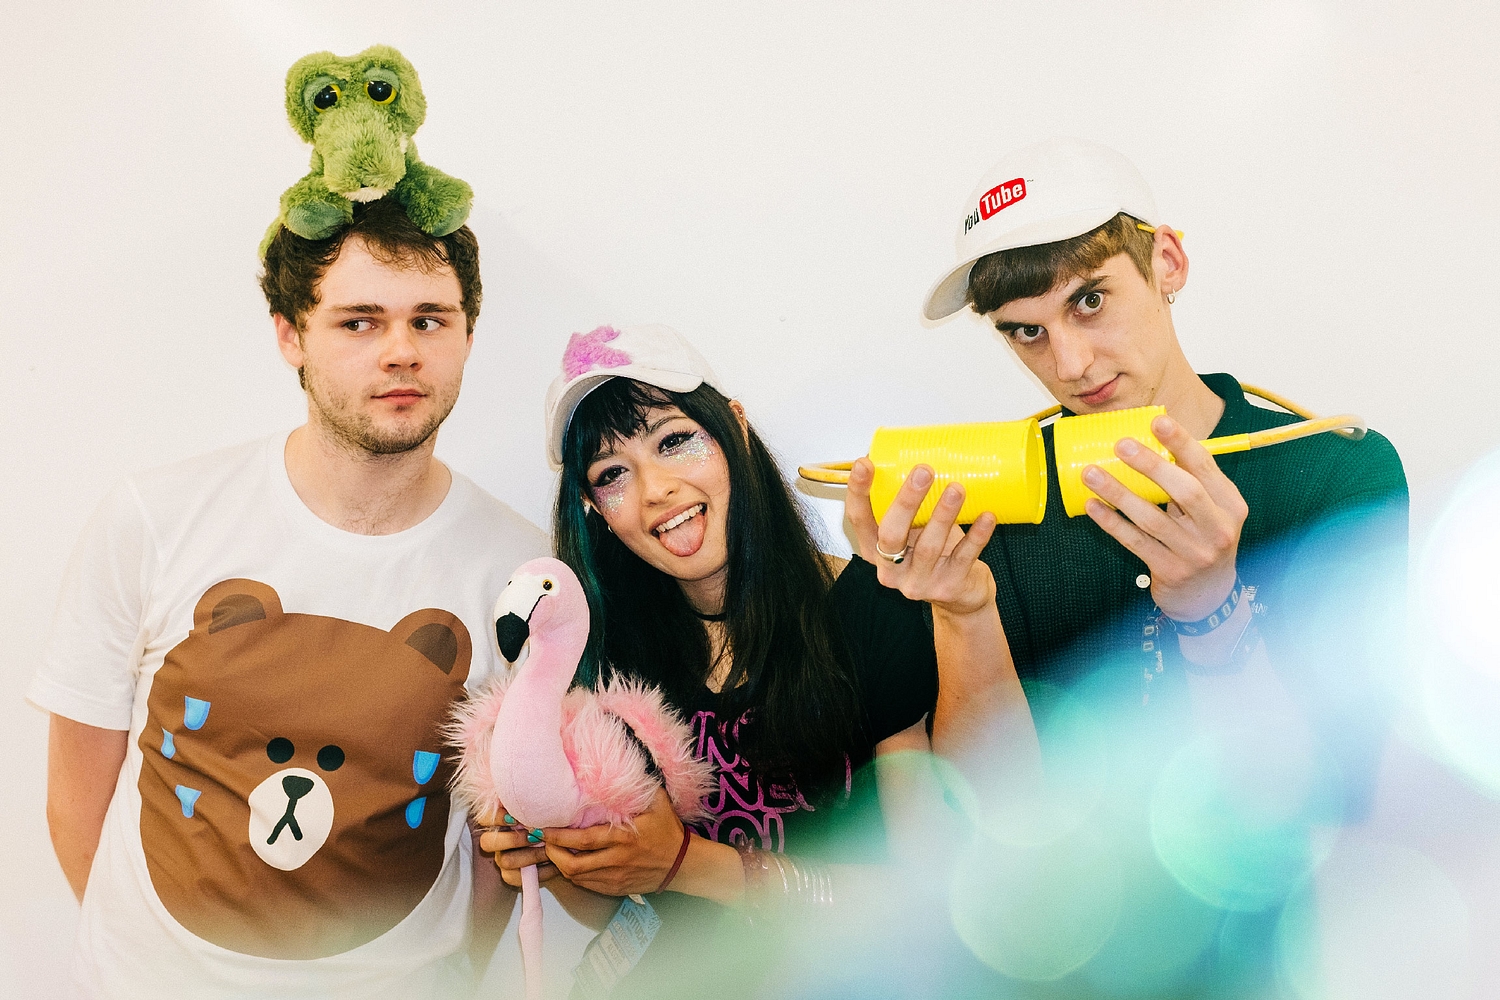 Kero Kero Bonito, Her’s and Soccer Mommy join Visions 2017